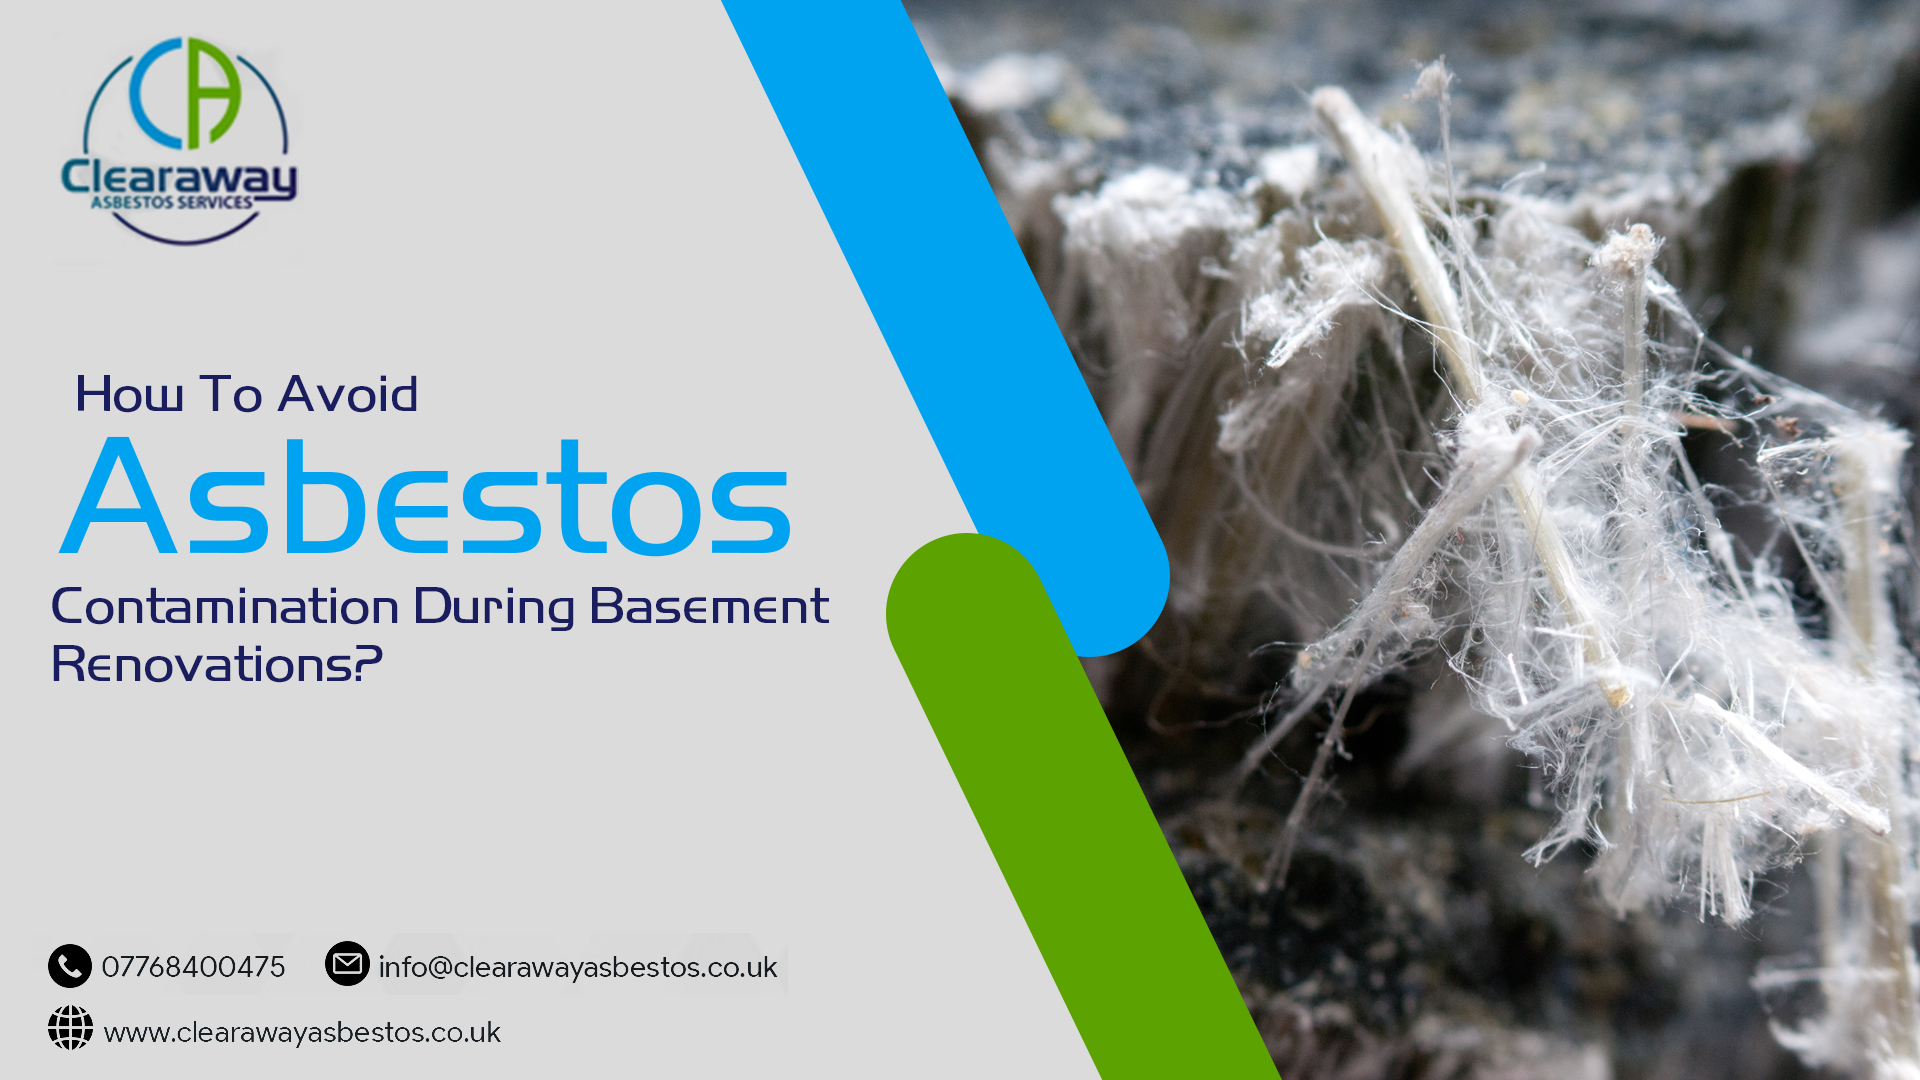 How To Avoid Asbestos Contamination During Basement Renovations